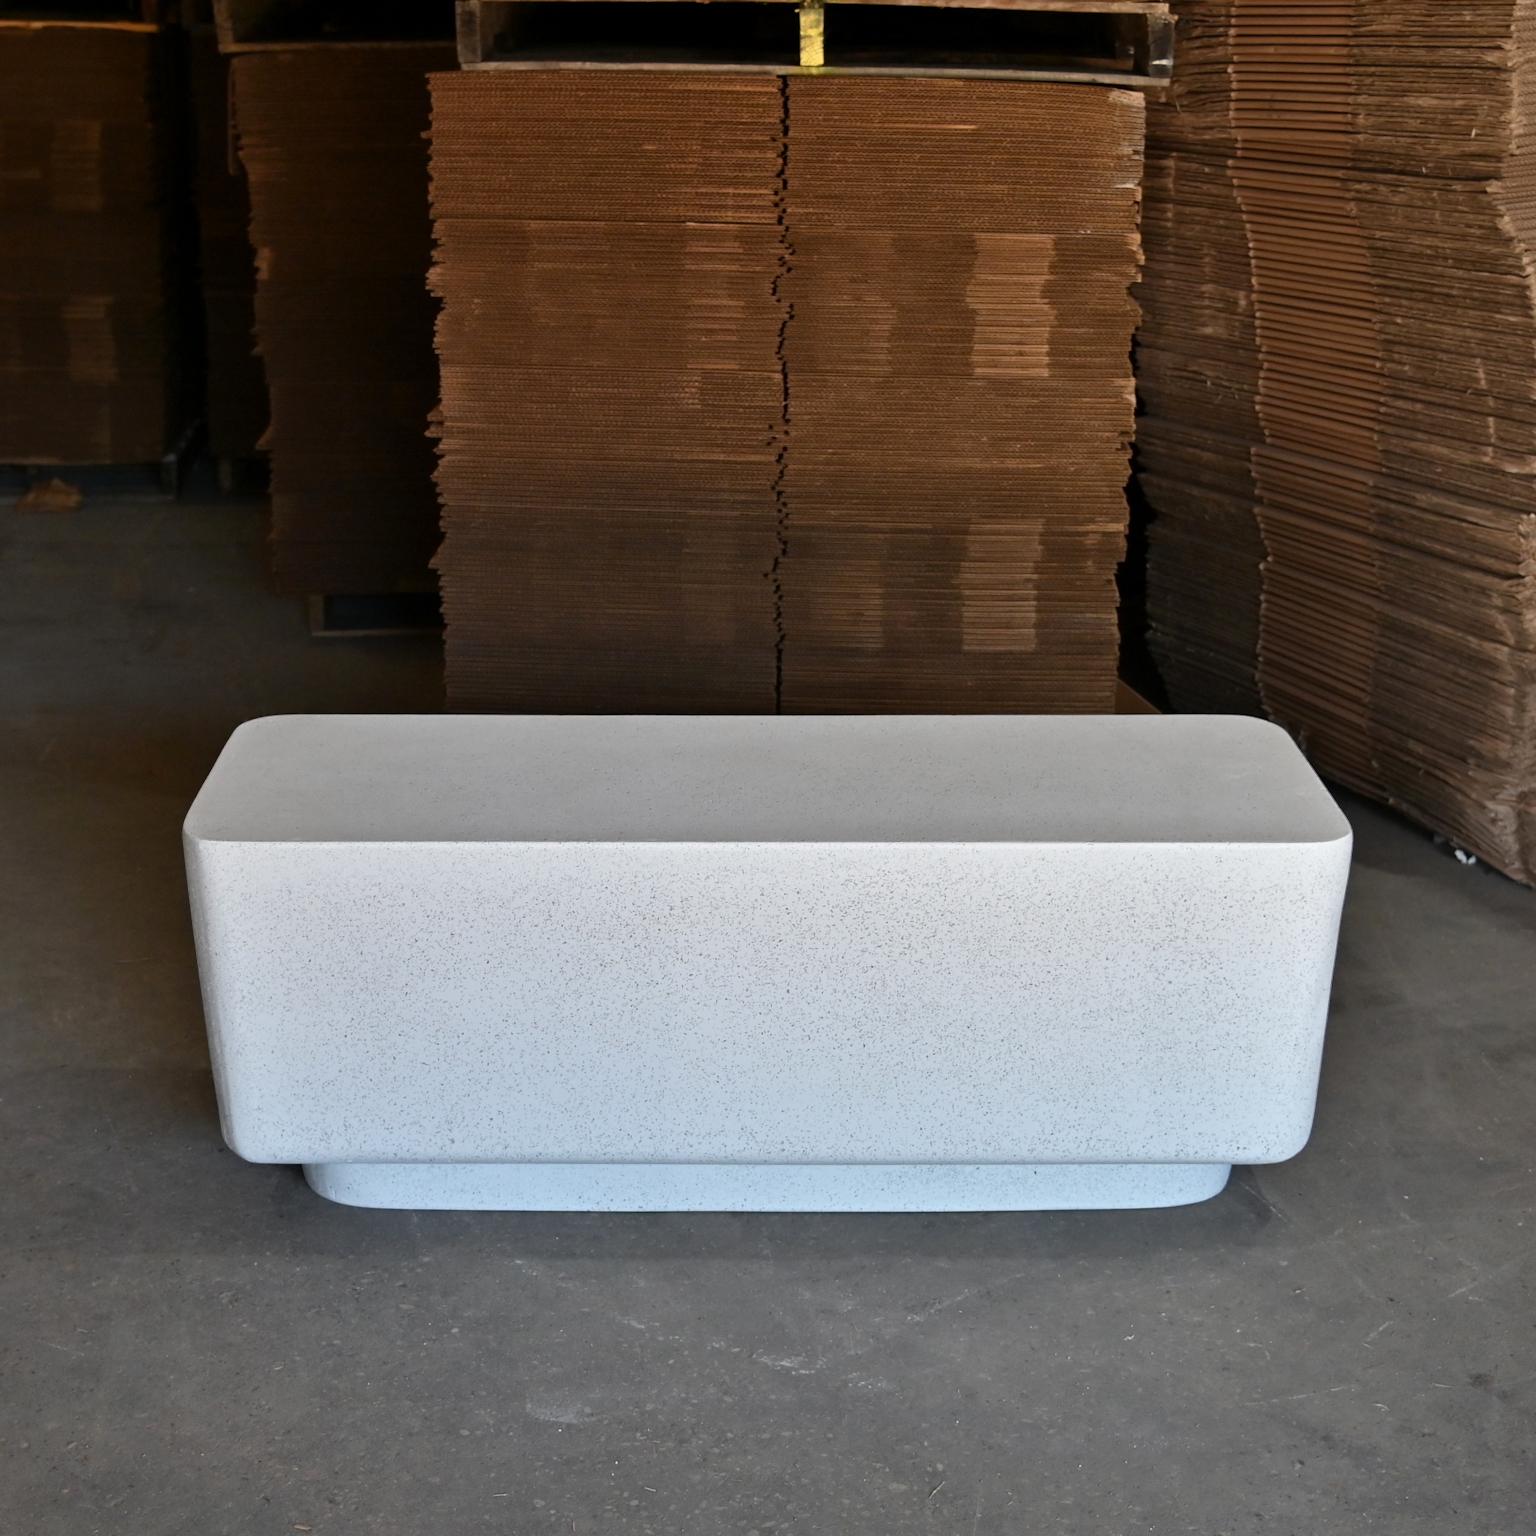 A sheer look, rounded and softened.

Dimensions: width 48 in. (122 cm), depth 18 in. (45.7 cm), height 18 in. (45.7 cm). weight 25 lbs. (11.3 kg)
No assembly required.

Finish color options:
White stone (shown)
Natural stone
Aged